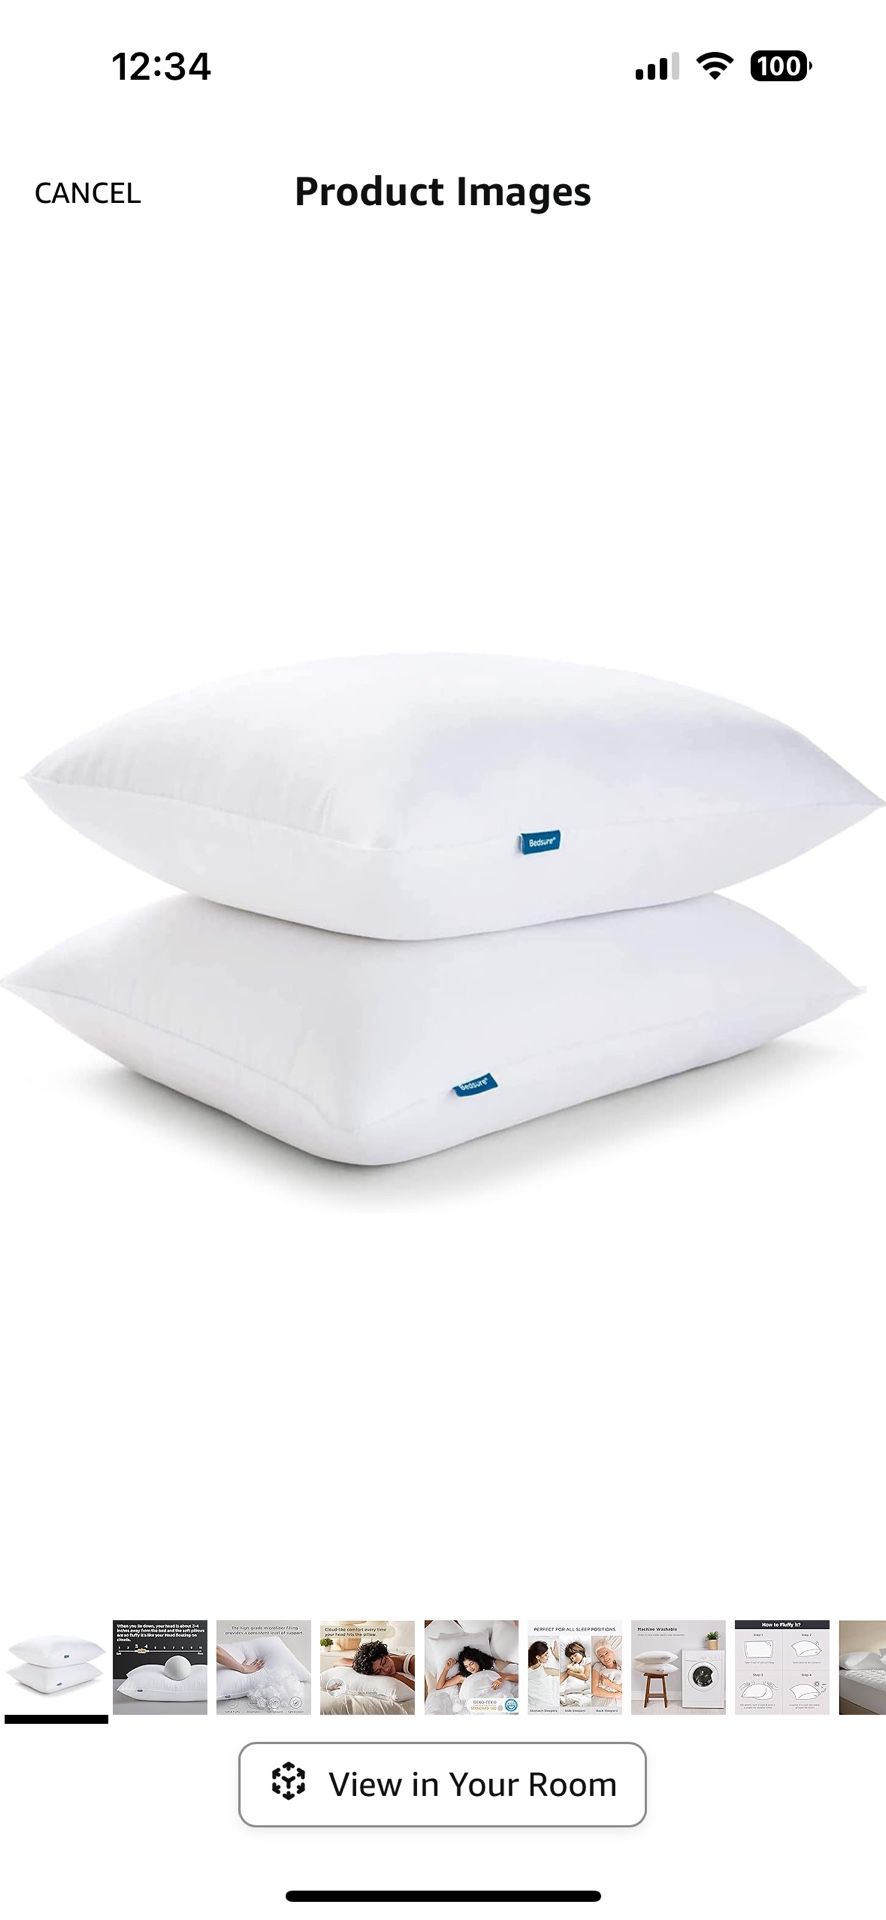 Pillows Queen Size Set of 2 - Queen Pillows 2 Pack Hotel Quality Bed Pillows for Sleeping Soft and Supportive Pillows for Side, Back Sleepers